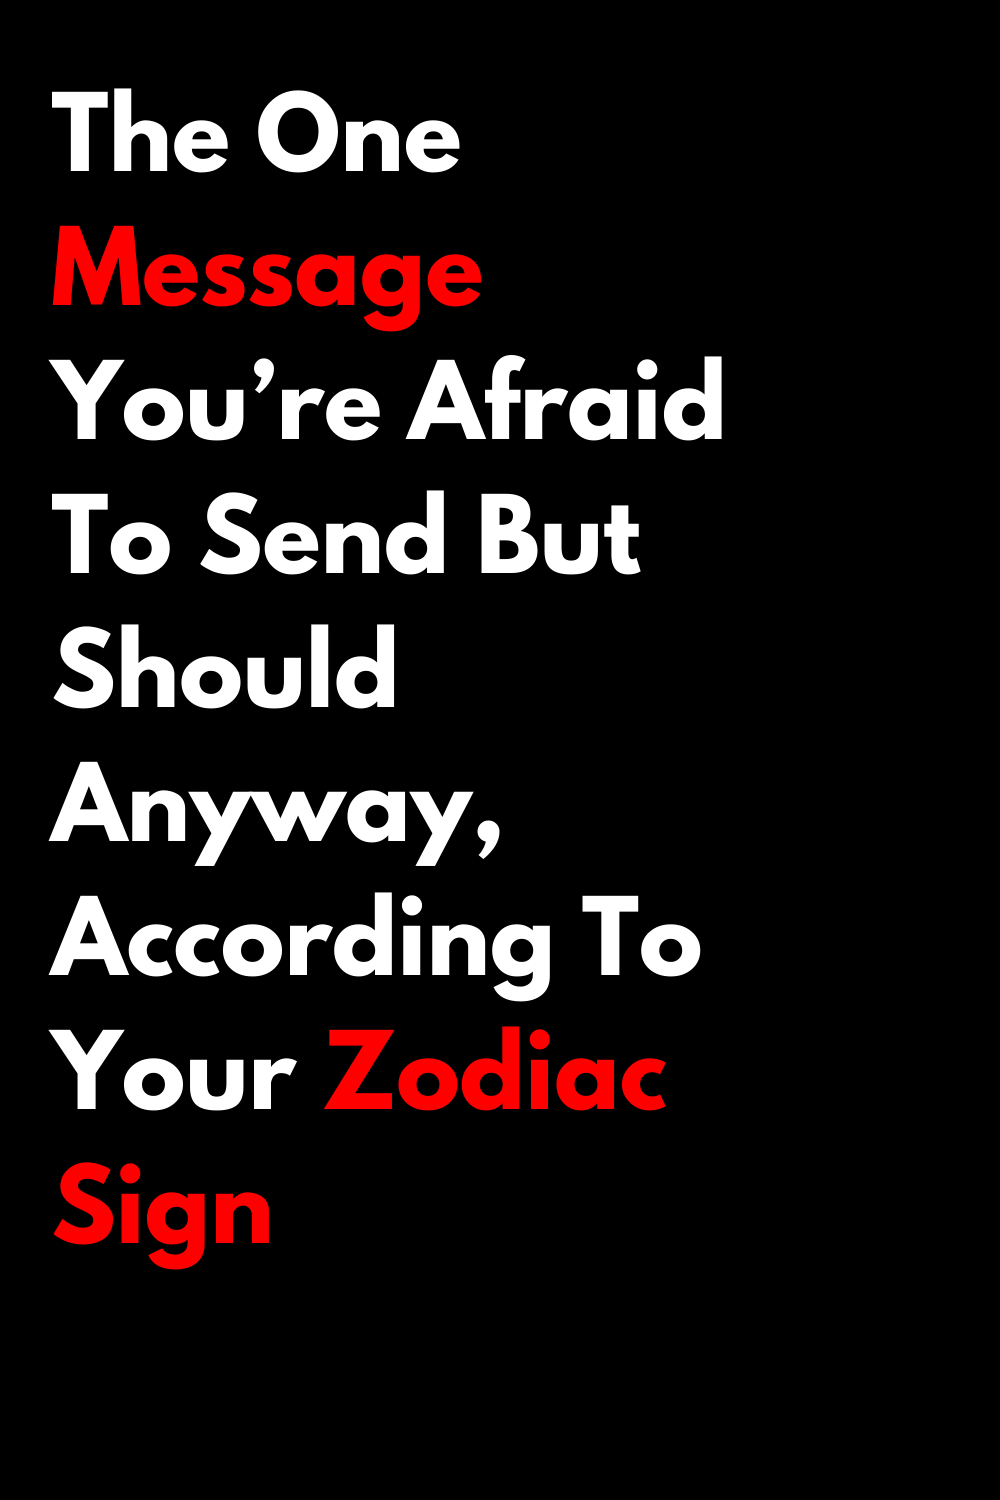 The One Message You’re Afraid To Send But Should Anyway, According To Your Zodiac Sign